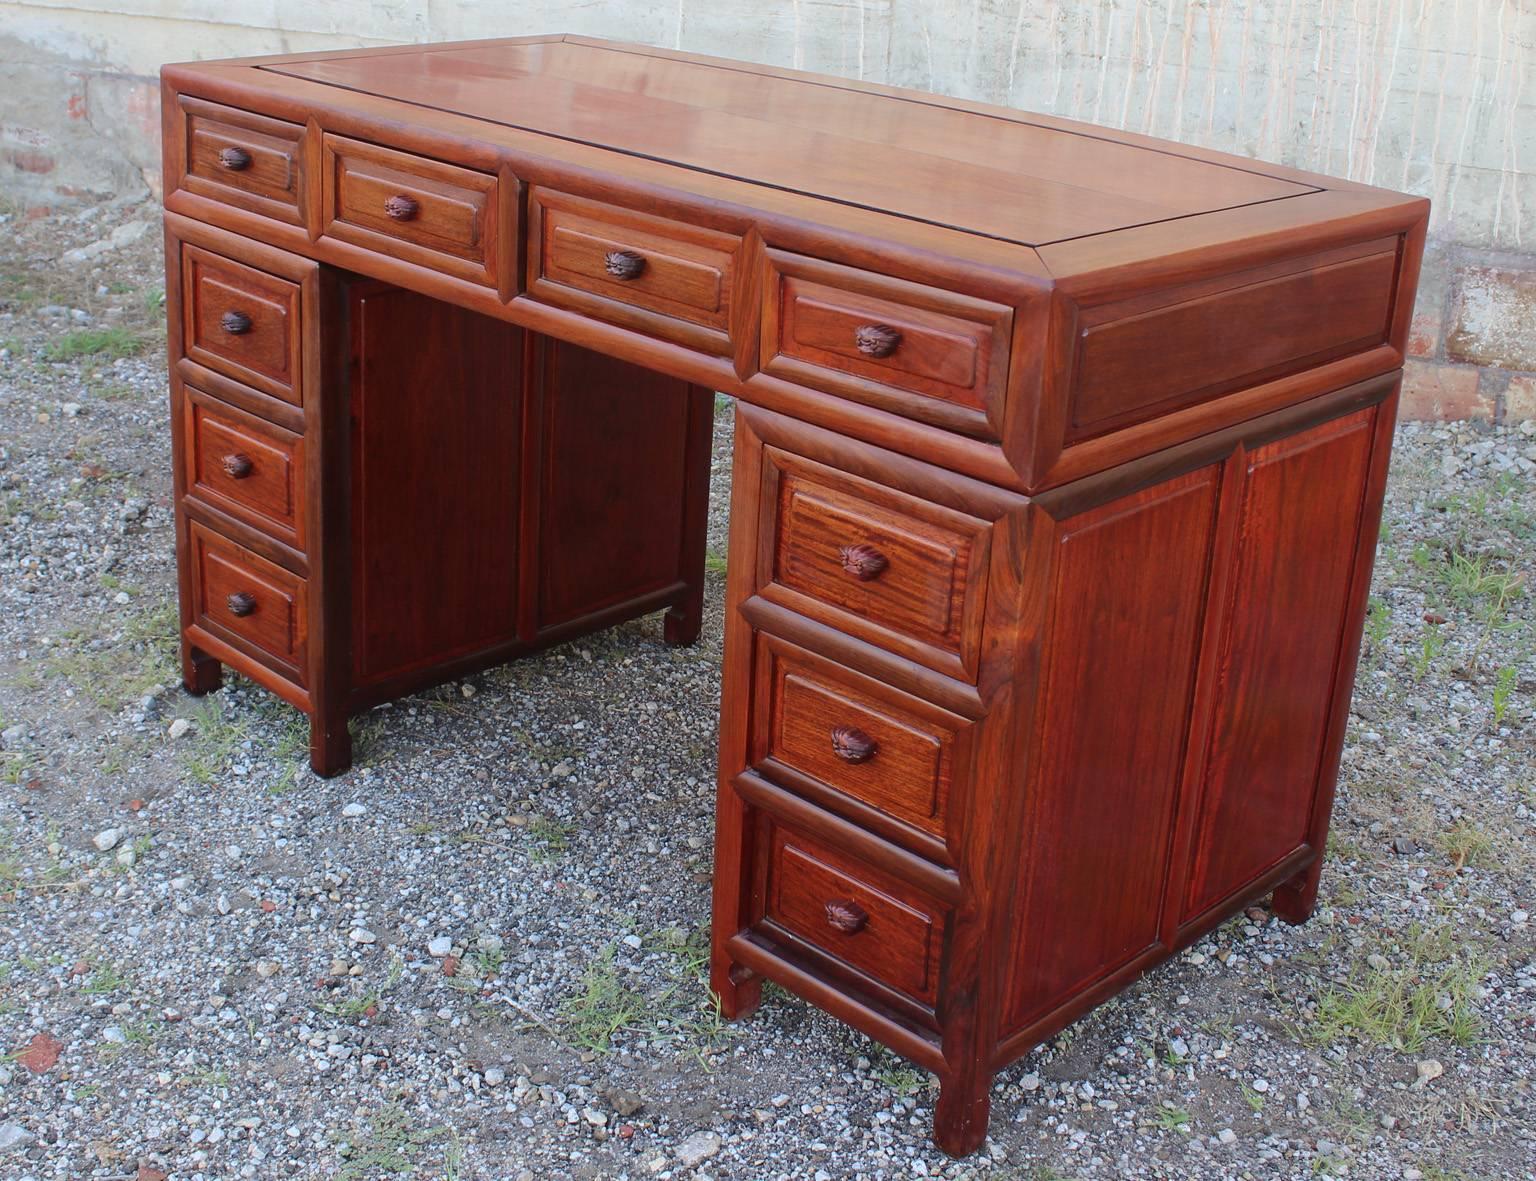 Vintage Asian solid rosewood double pedestal desk. In excellent vintage condition and it breaks down into three pieces for easier moving and shipping.

If you are looking for a desk, look no more. This is an outstanding piece of furniture. A